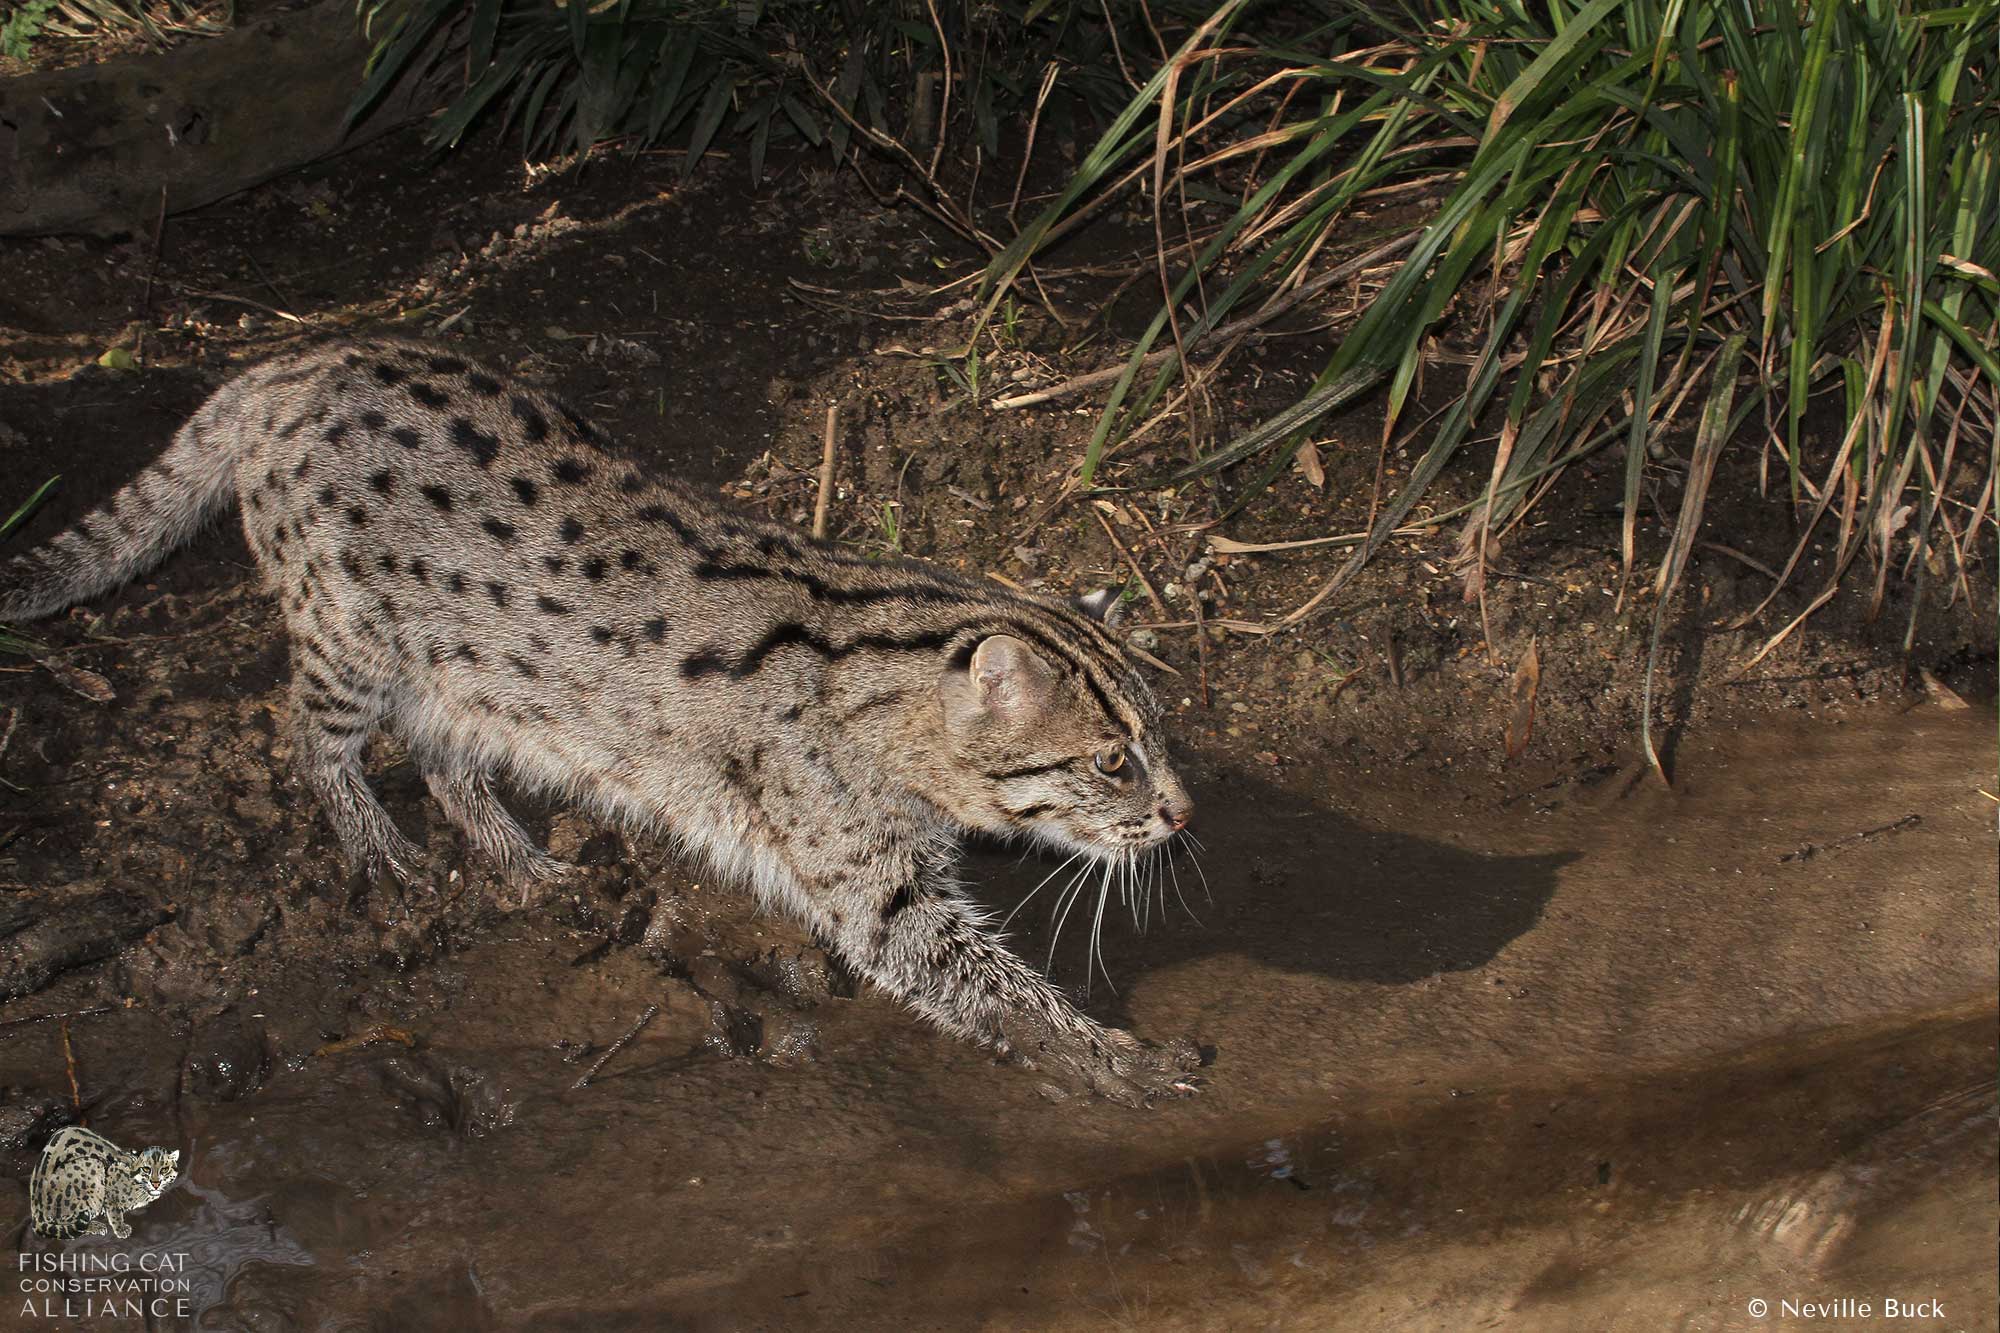 Happy Fishing Cat February! Did You You?: The Fishing Cat